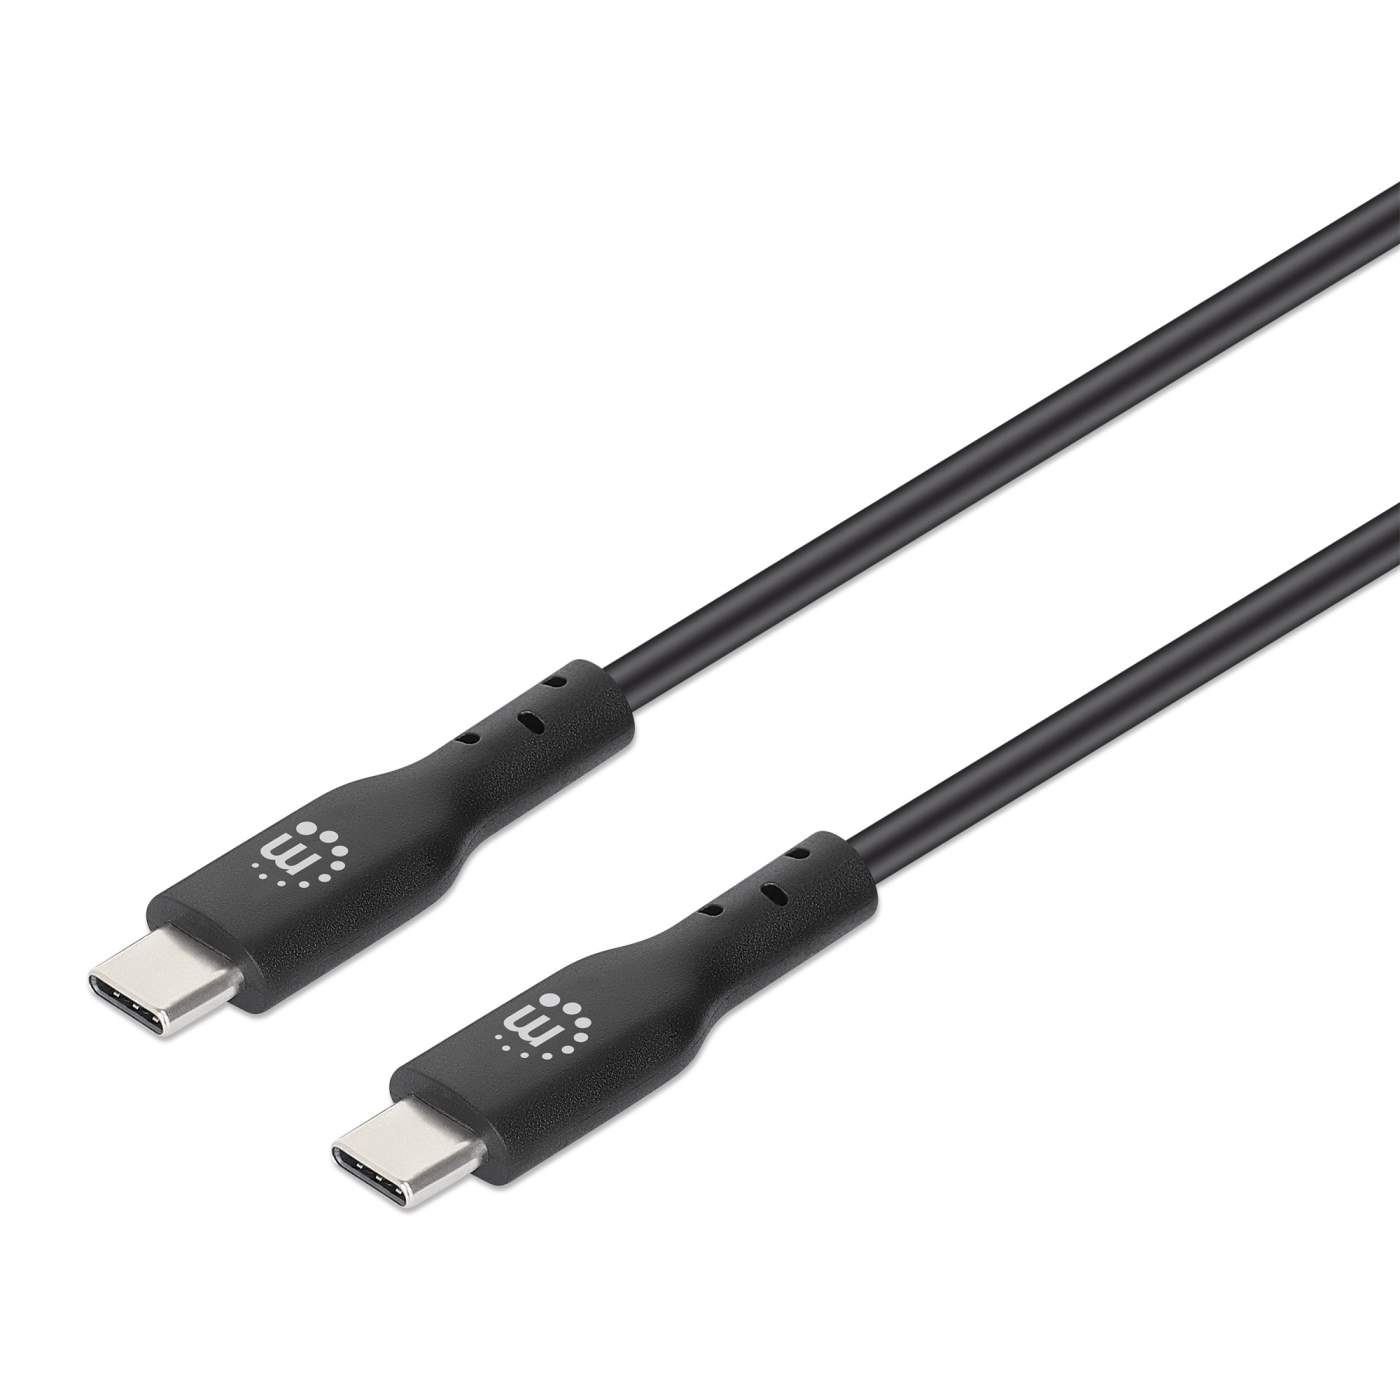 Pro Series USB 2.0 Device Cable